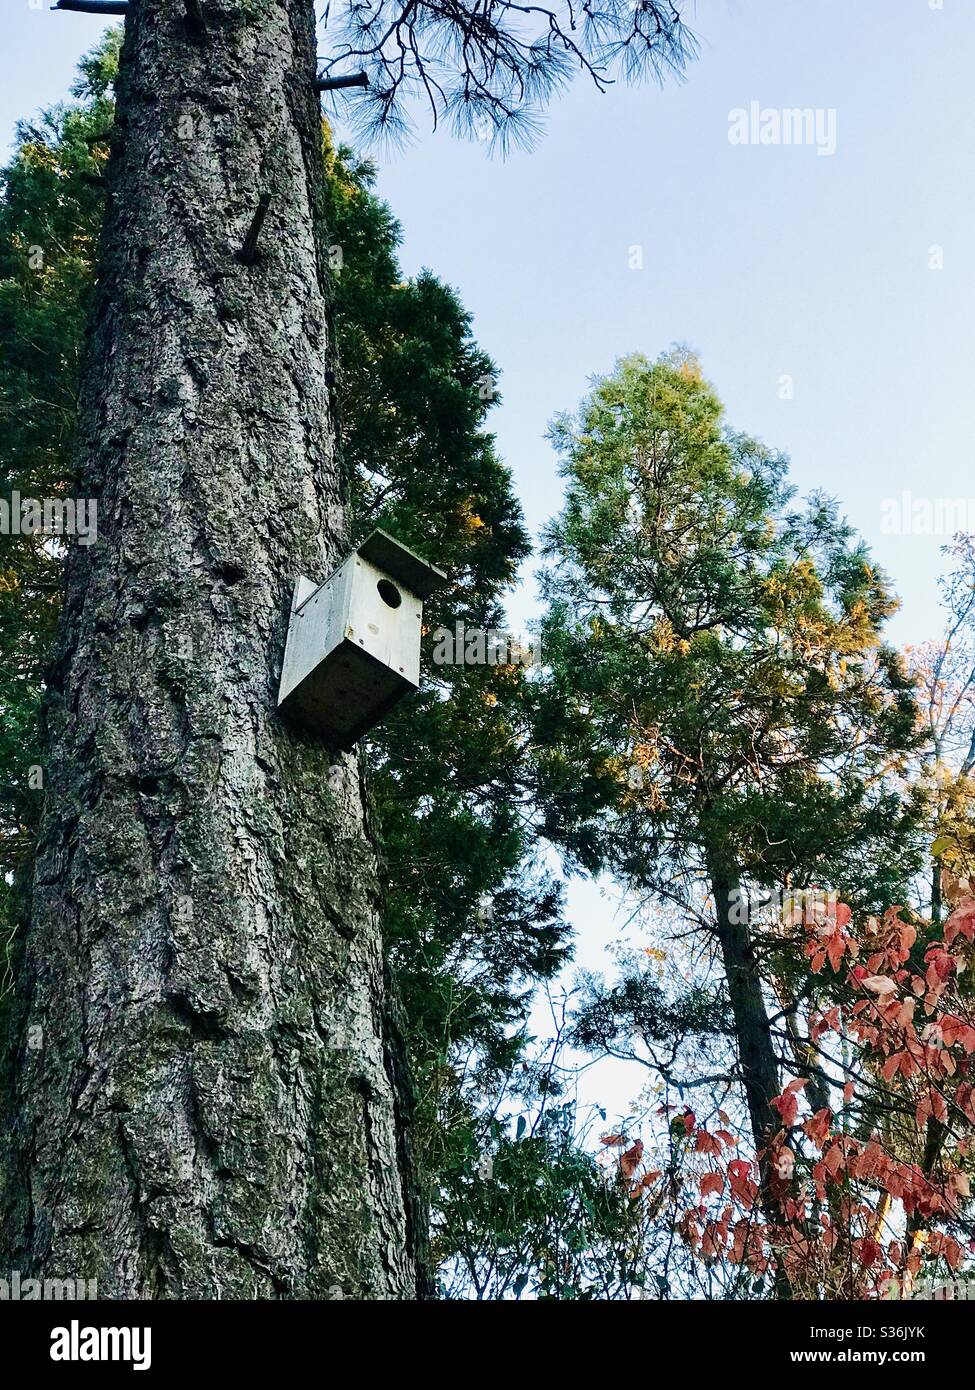 A birdhouse high up in a pine tree in the mountains. Stock Photo